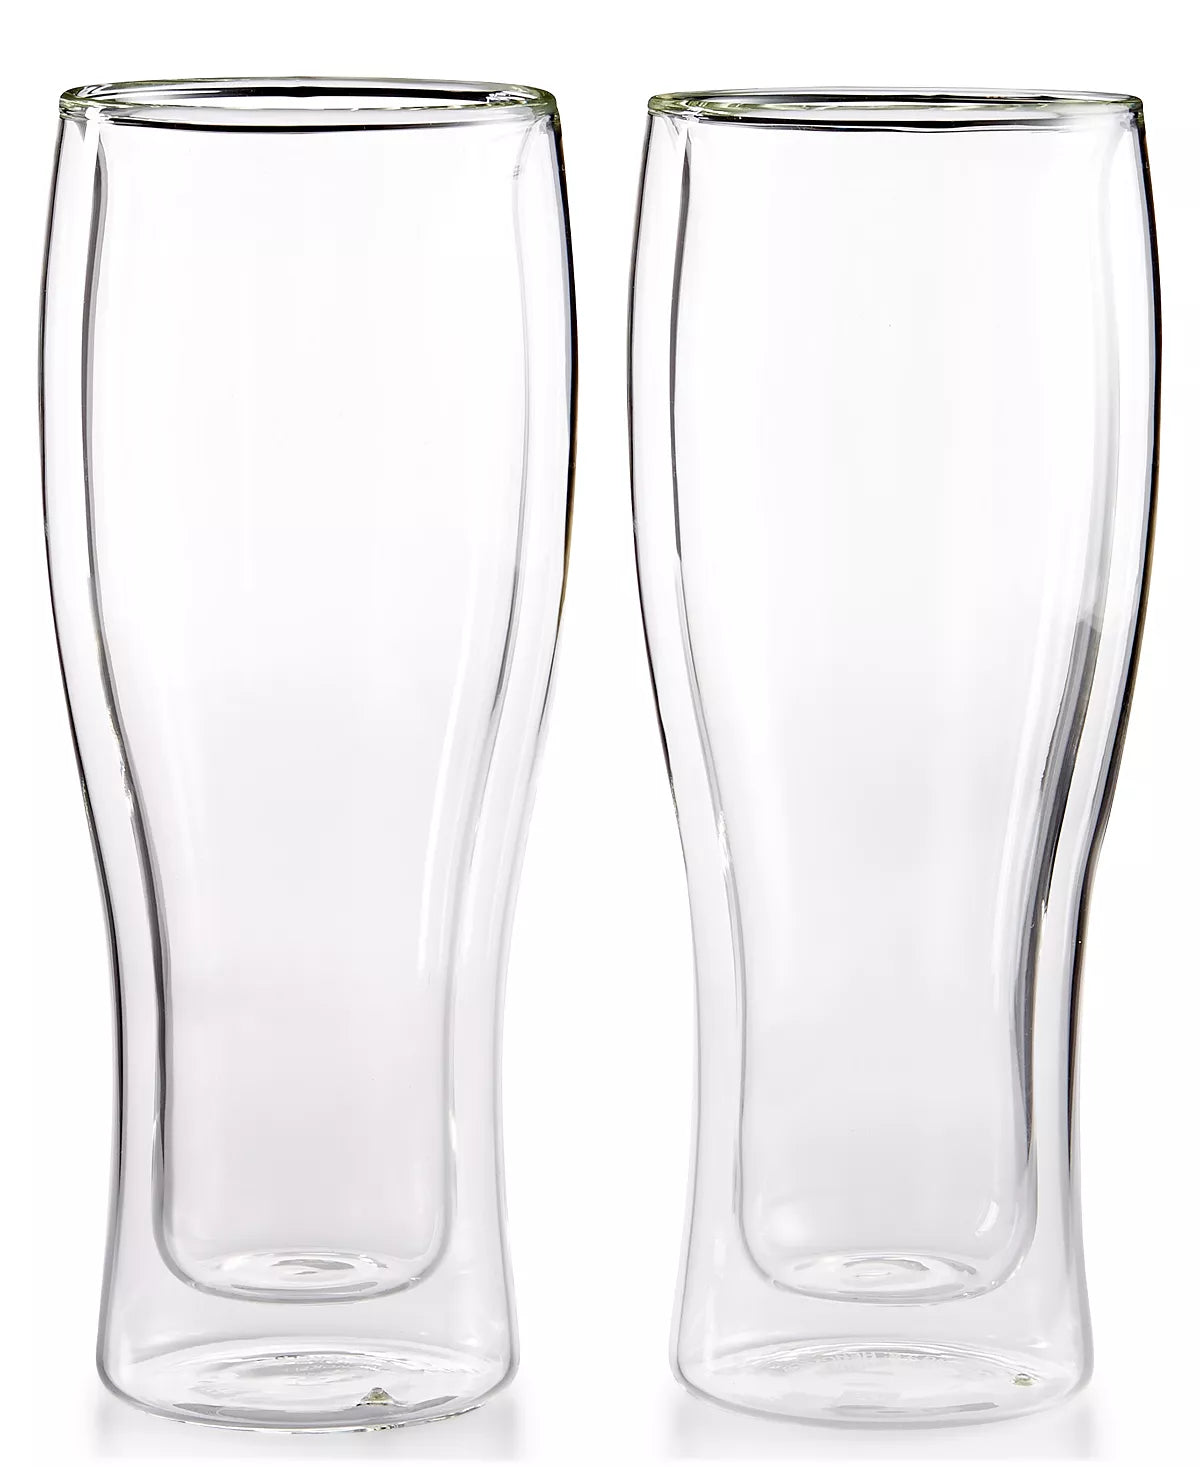 Double Walled Beer Glass